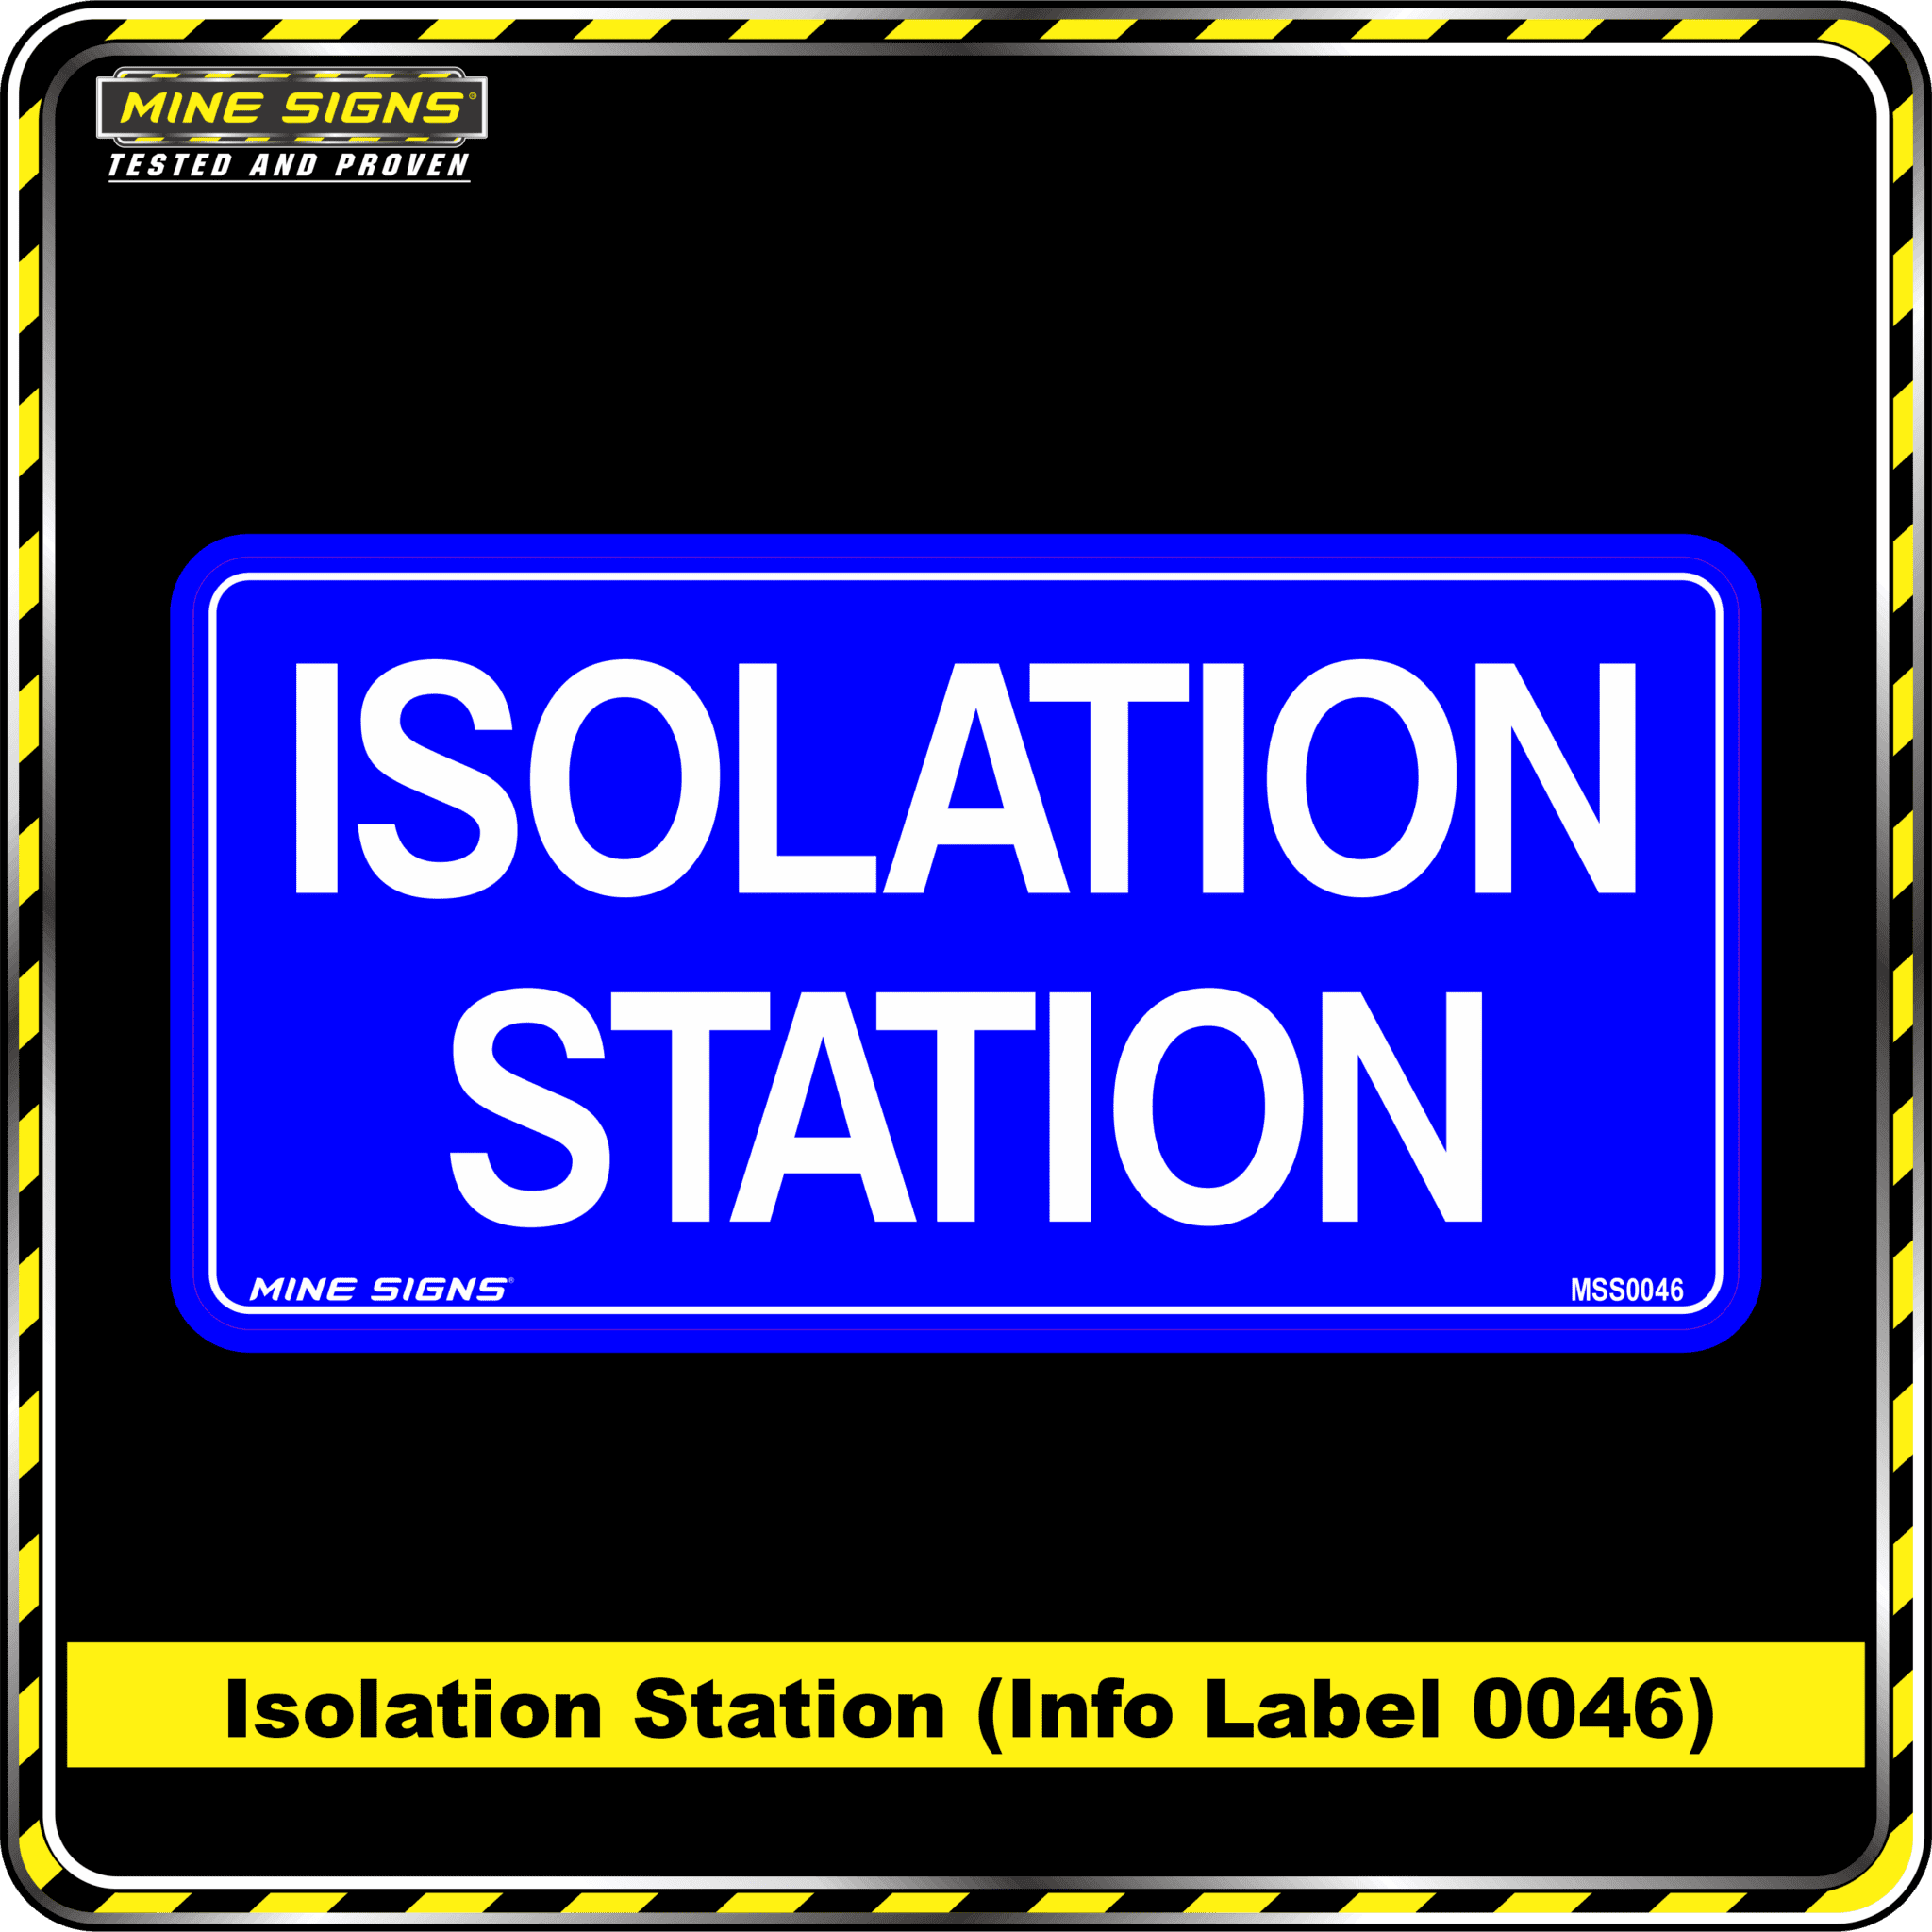 MS - Product Background - Safety Signs - Isolation Station 0046